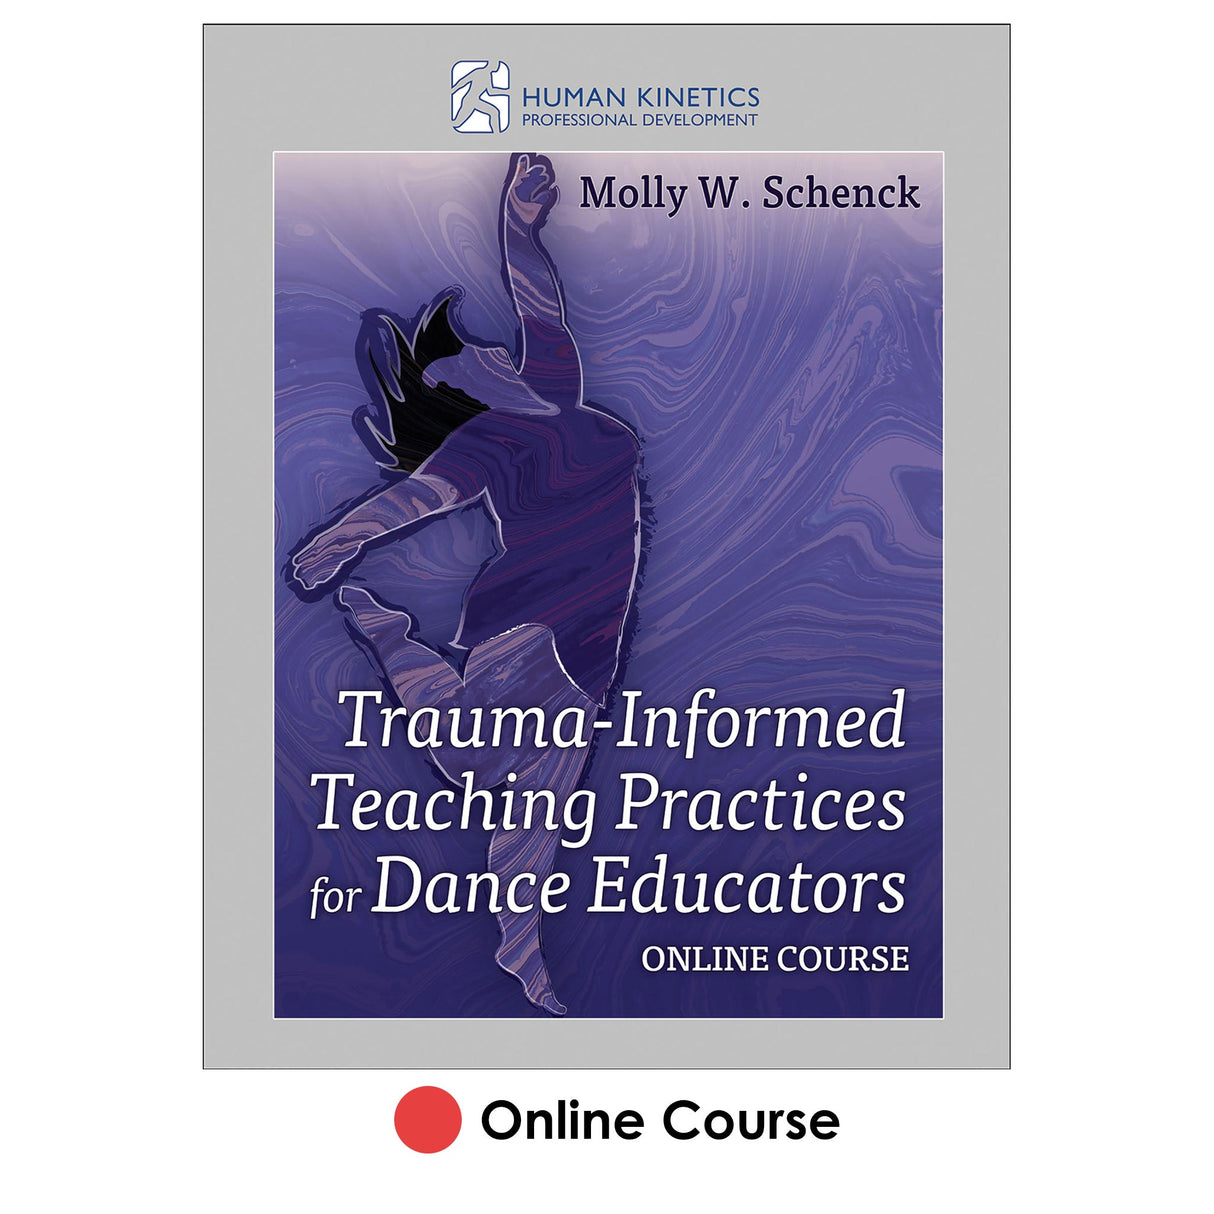 Trauma-Informed Teaching Practices for Dance Educators Online Course